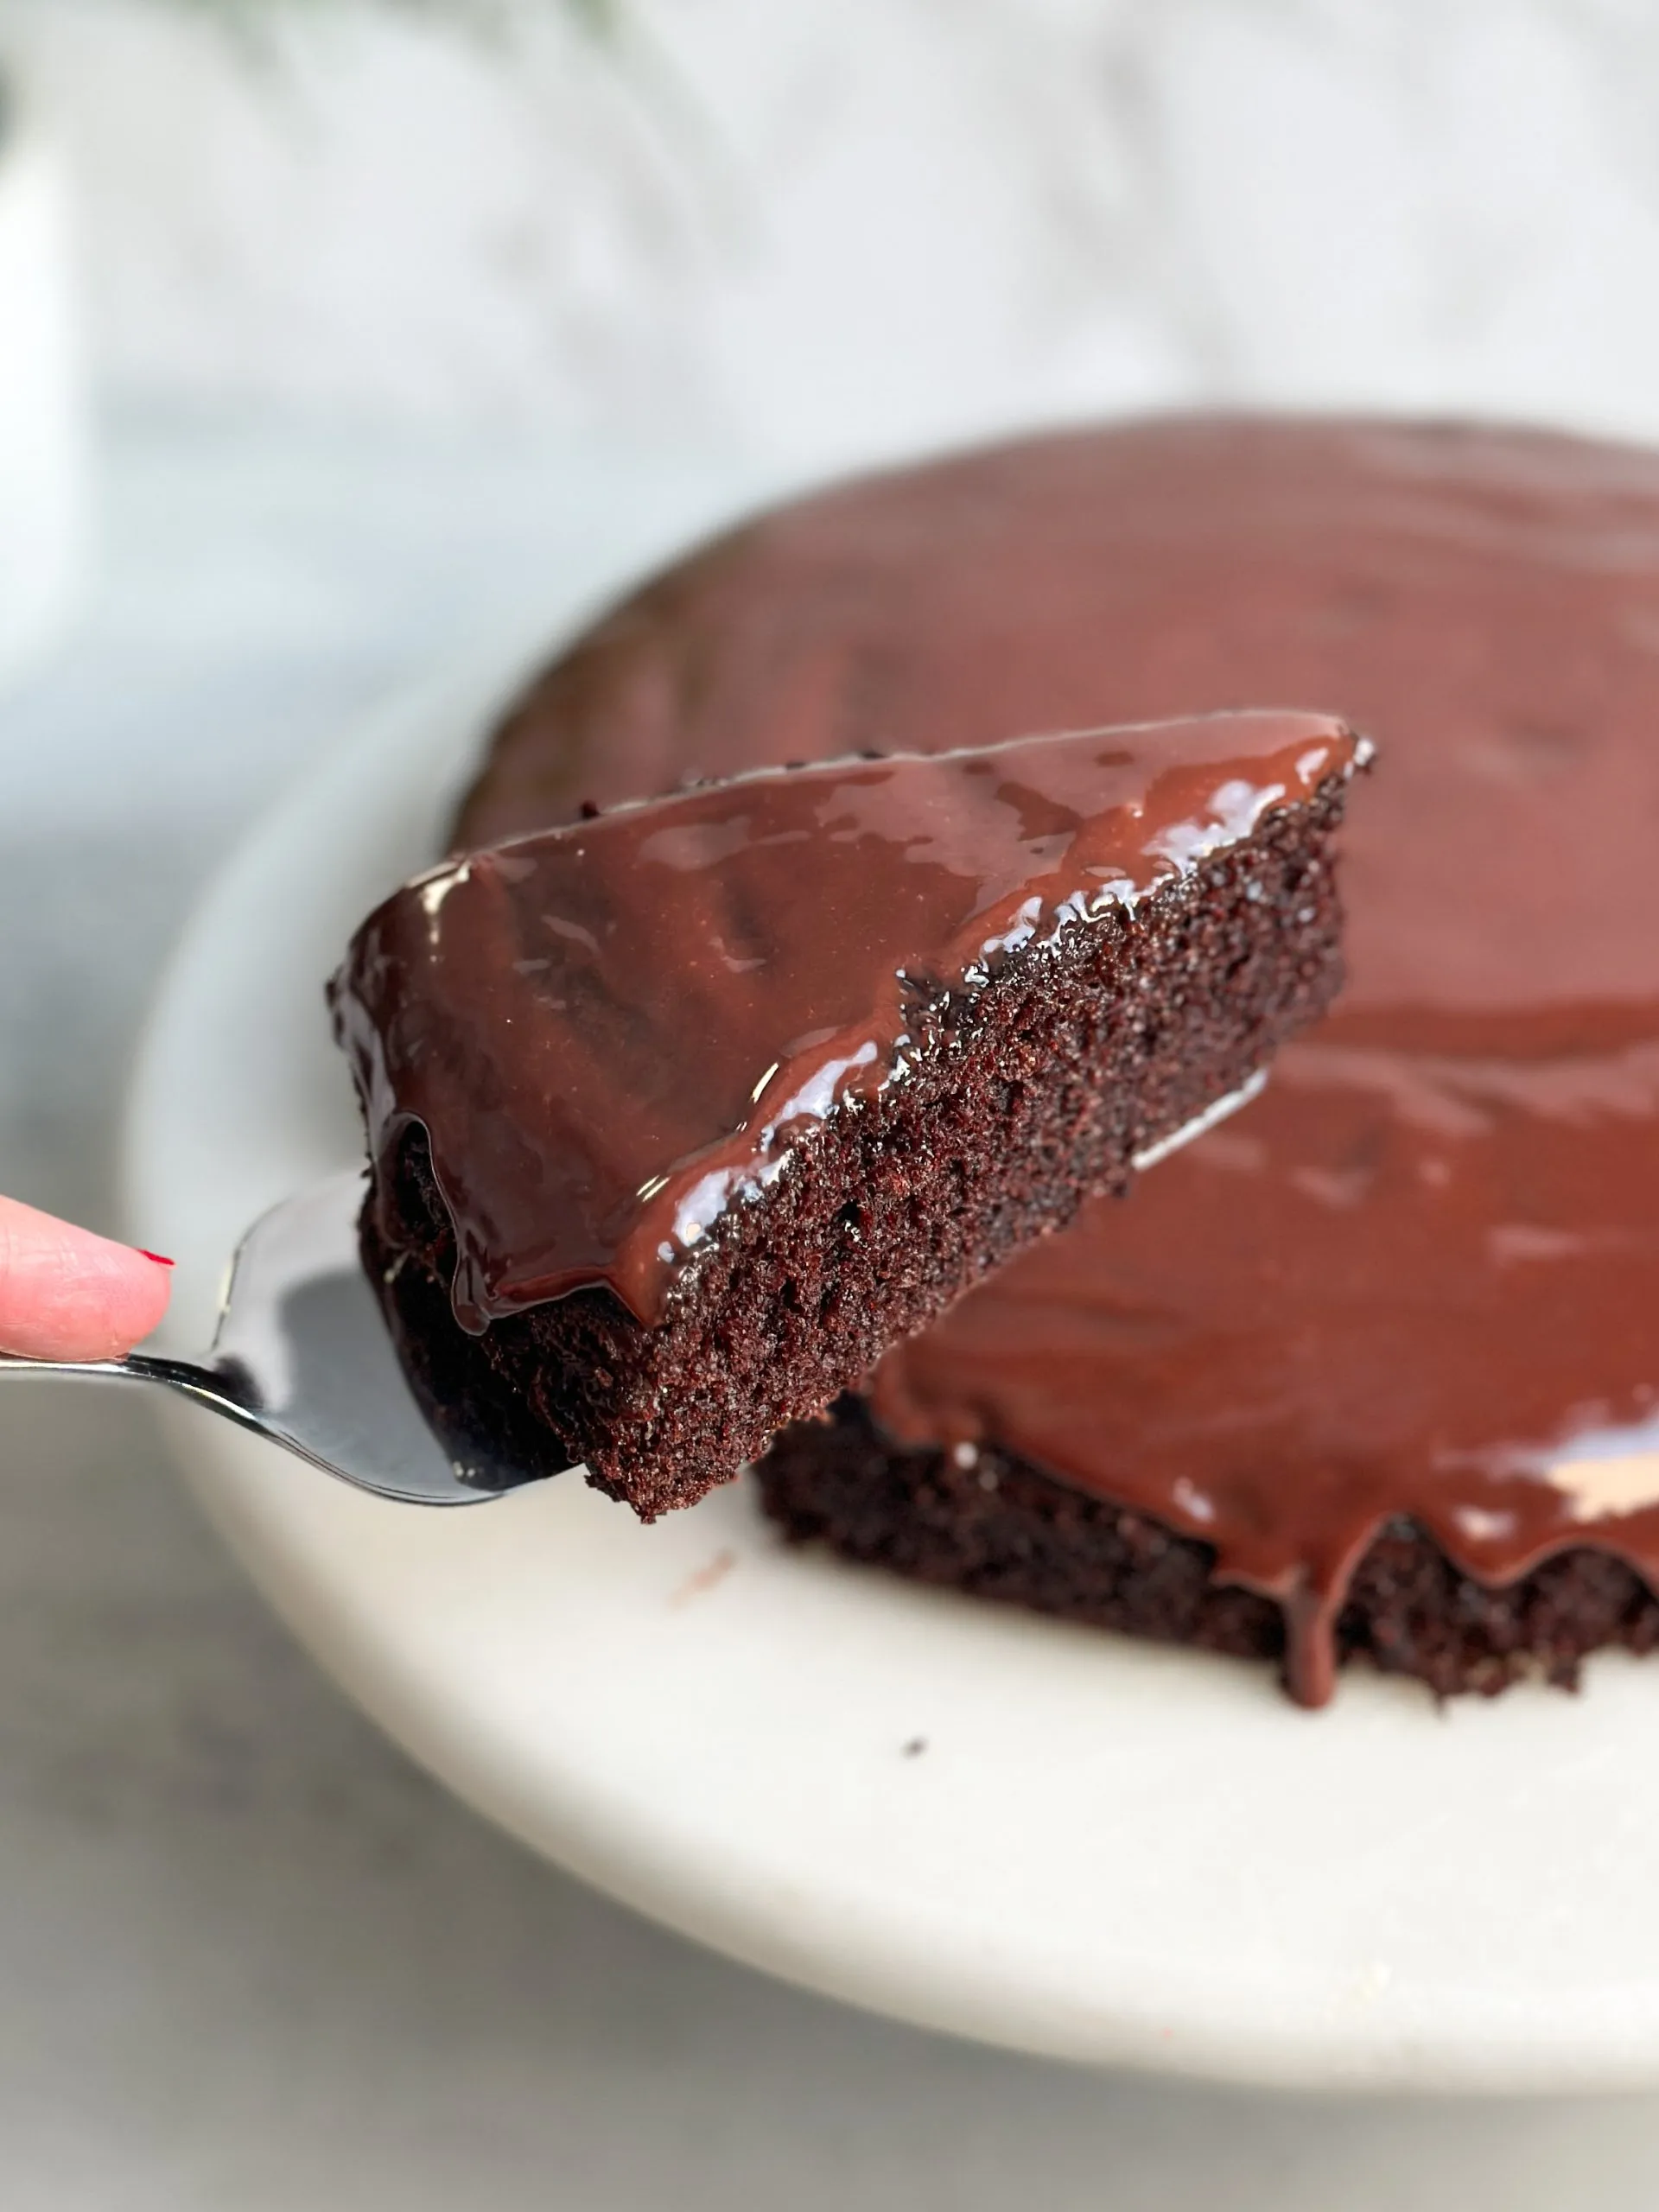 The Best Chocolate Cake Recipe Was Hiding on the Back of the Box